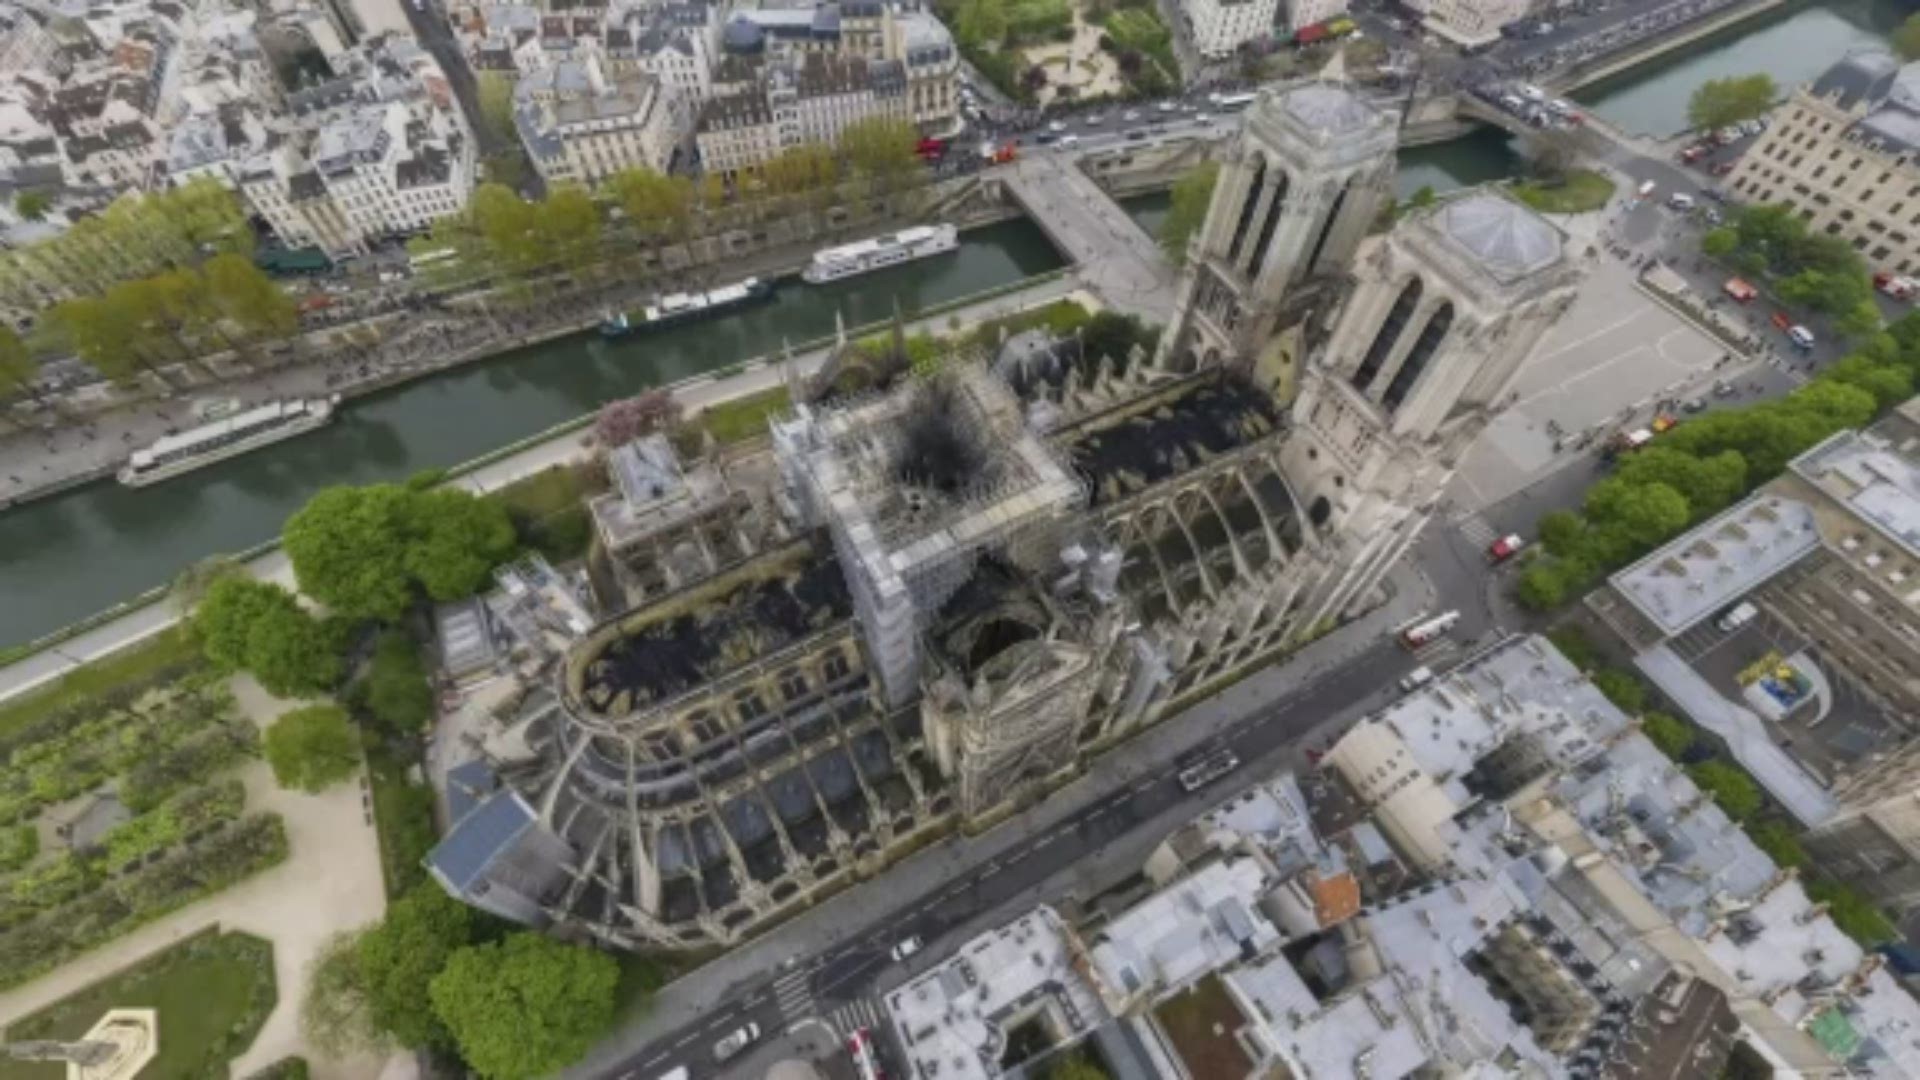 This 3D model contrasts an undamaged Notre Dame cathedral with a photo of the cathedral taken on April 16, 2019, the day after the fire. (AP)